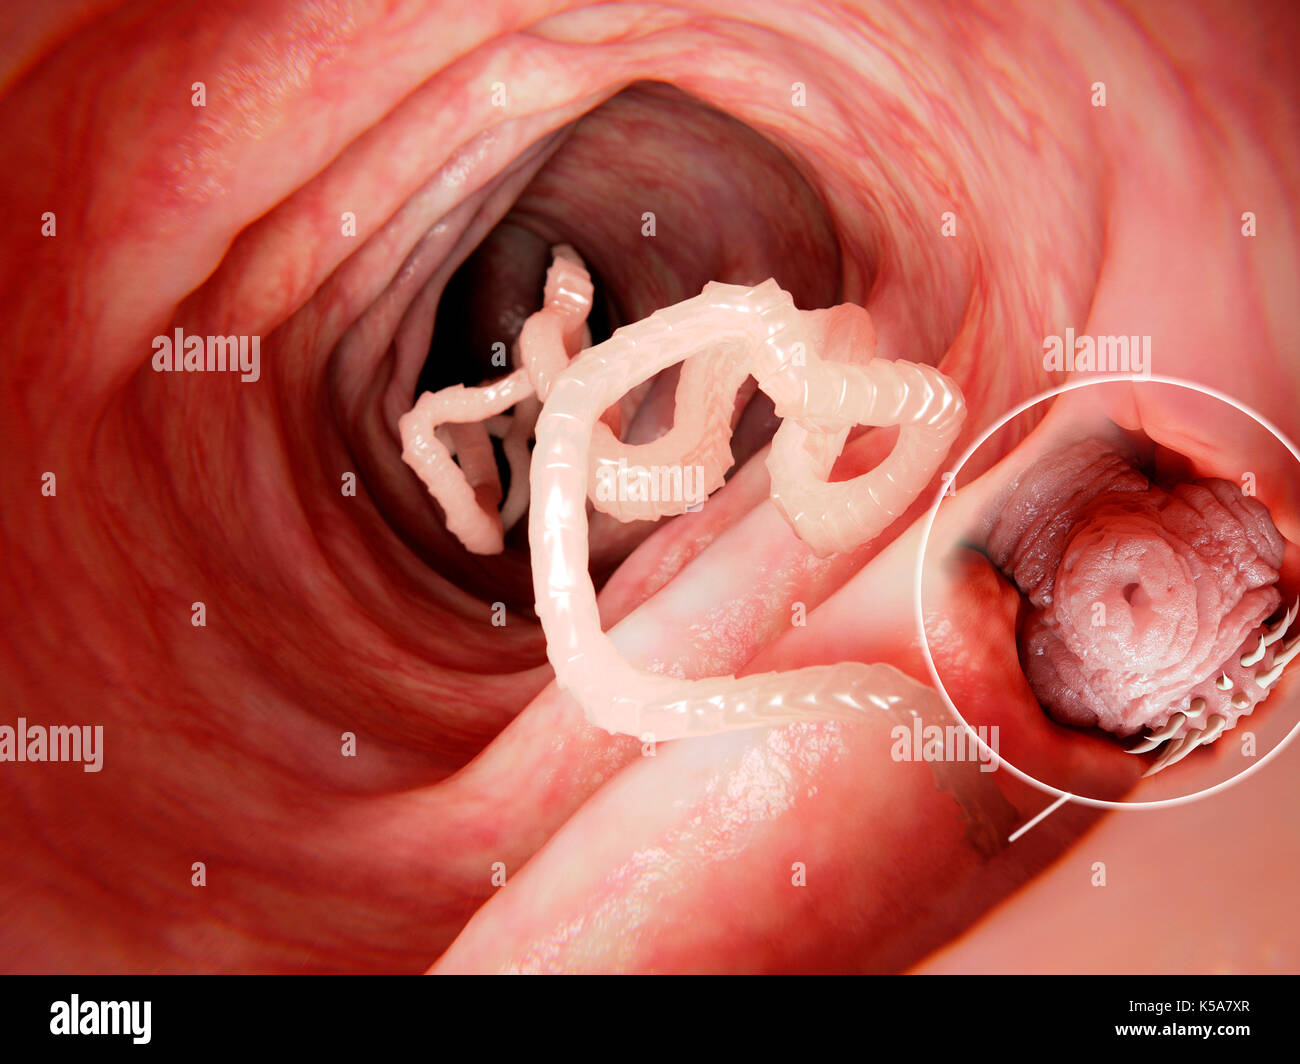 Illustration of a tapeworm in a human intestine. Tapeworms (Taenia sp.) are parasites that inhabit the human gut. They anchor themselves to the inside of the intestine and absorb nutrients through their body wall. Tapeworms may grow to several metres in length, but infestation does not necessarily cause symptoms. Stock Photo